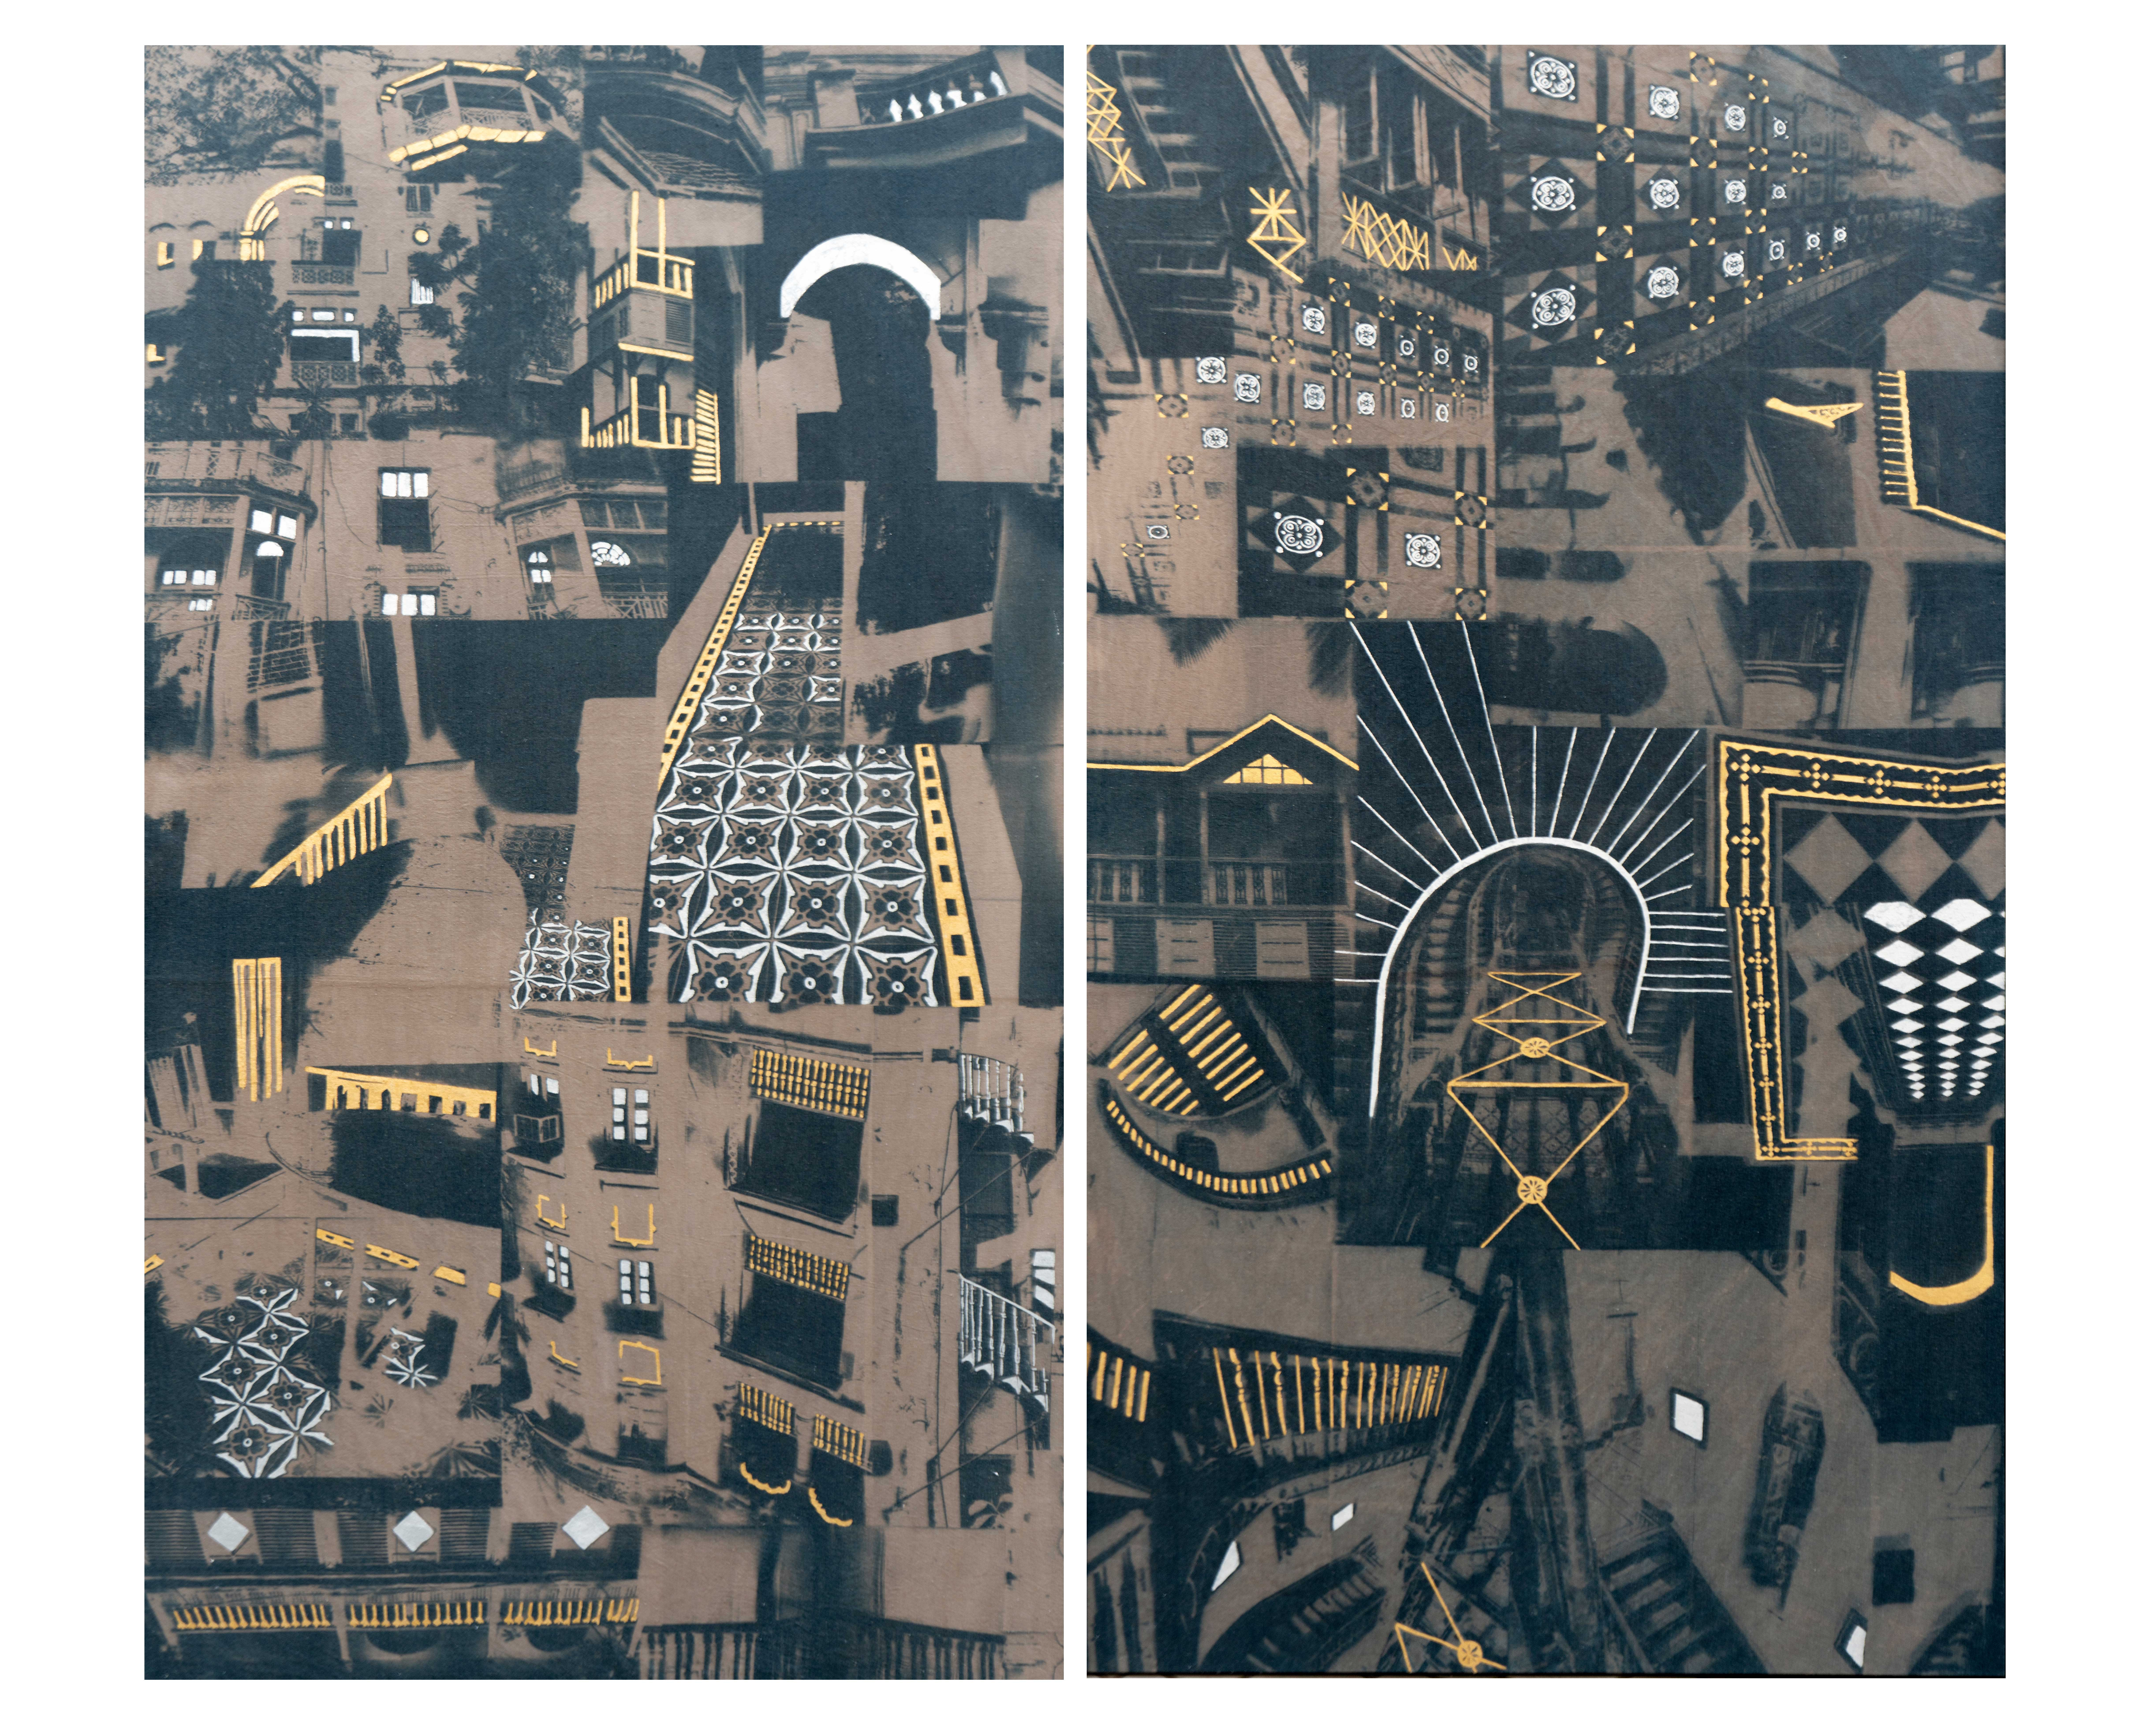 The two panels from ‘Imprints of a City’ by Savitha Ravi, the cyanotypes capturing
the architectural legacy of Mumbai